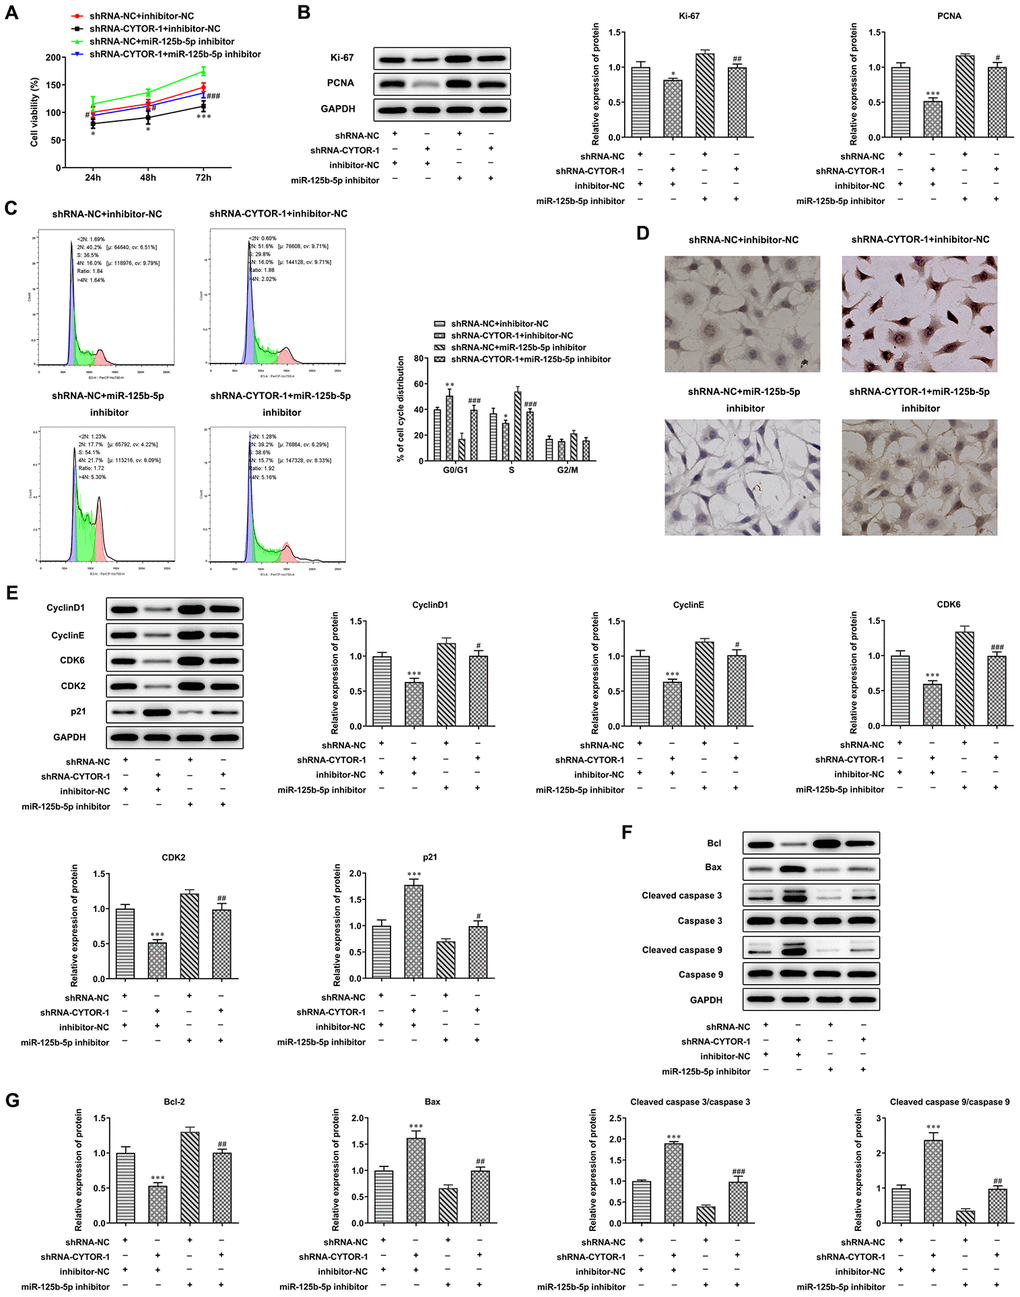 CYTOR affects proliferation, cell cycle and apoptosis of HCC cells by miR-125b-5p. (A) The proliferation of Hep3b cells after transfection of shRNA-CYTOR-1 and miR-125b-5p inhibitor was detected by CCK-8 assay. *P#P###PB) The expression of proliferation-related proteins in Hep3b cells after transfection of shRNA-CYTOR-1 and miR-125b-5p inhibitor was detected by Western blot analysis. *P#P##PC) The cell cycle of Hep3b cells after transfection of shRNA-CYTOR-1 and miR-125b-5p inhibitor was analyzed by flow cytometry analysis. *P###PD) The apoptosis of Hep3b cells after transfection of shRNA-CYTOR-1 and miR-125b-5p inhibitor was shown by TUNEL assay. (E) The expression of cell cycle-related proteins in Hep3b cells after transfection of shRNA-CYTOR-1 and miR-125b-5p inhibitor was detected by Western blot analysis. ***P#P##P###PF, G) The expression of apoptosis-related proteins in Hep3b cells after transfection of shRNA-CYTOR-1 and miR-125b-5p inhibitor was detected by Western blot analysis. ***P##P###P